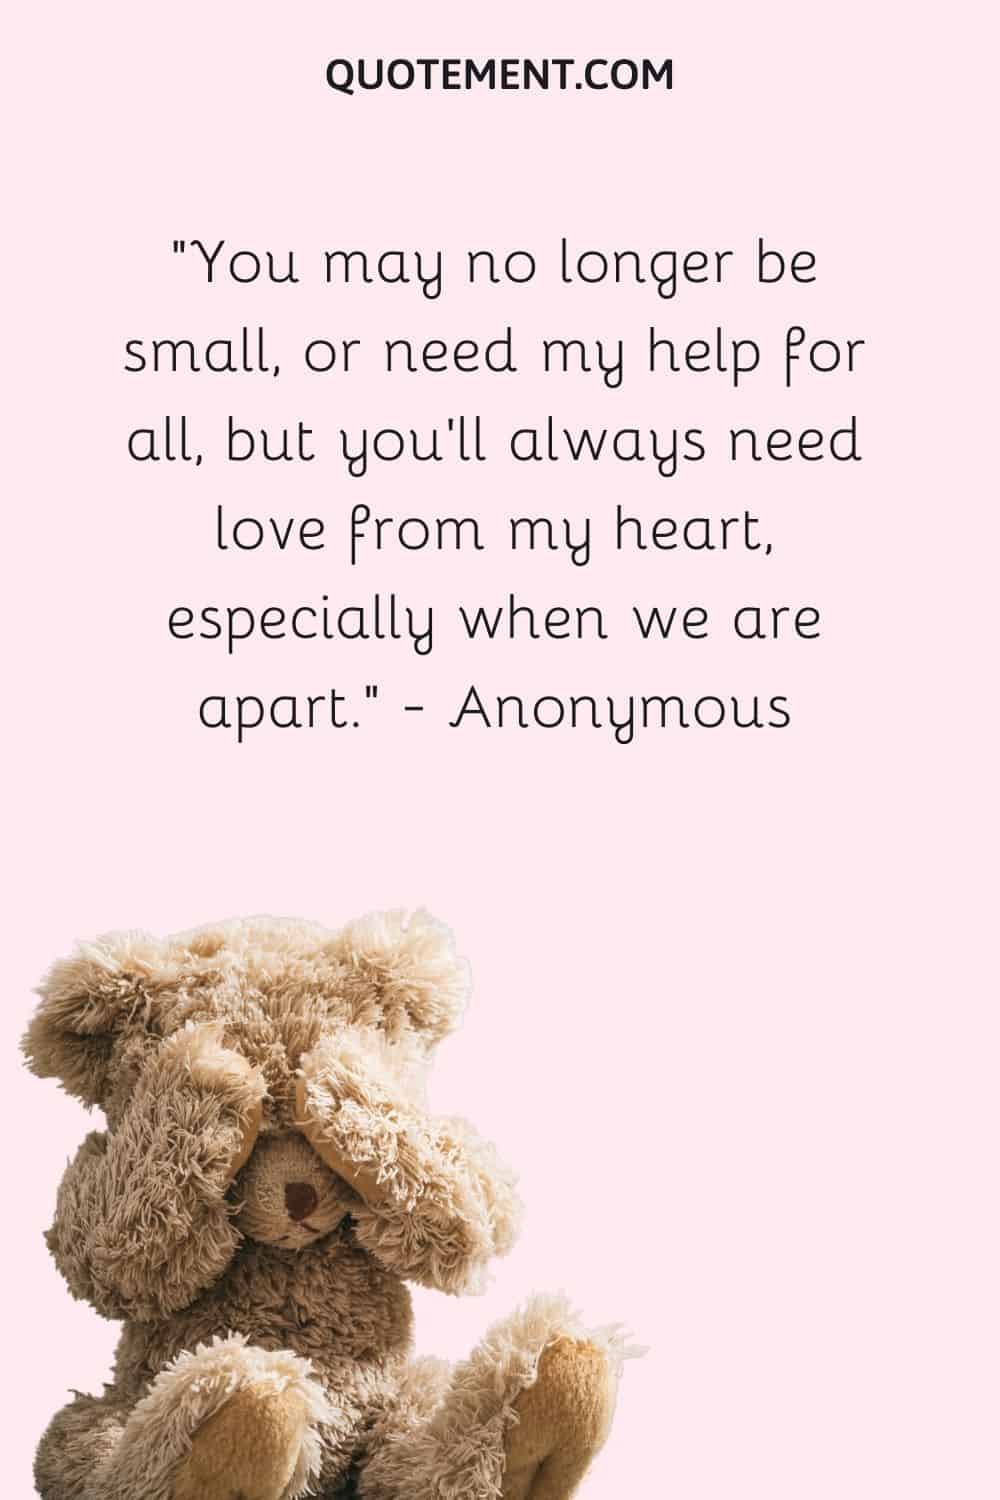 You may no longer be small, or need my help for all, but you'll always need love from my heart, especially when we are apart. — Anonymous